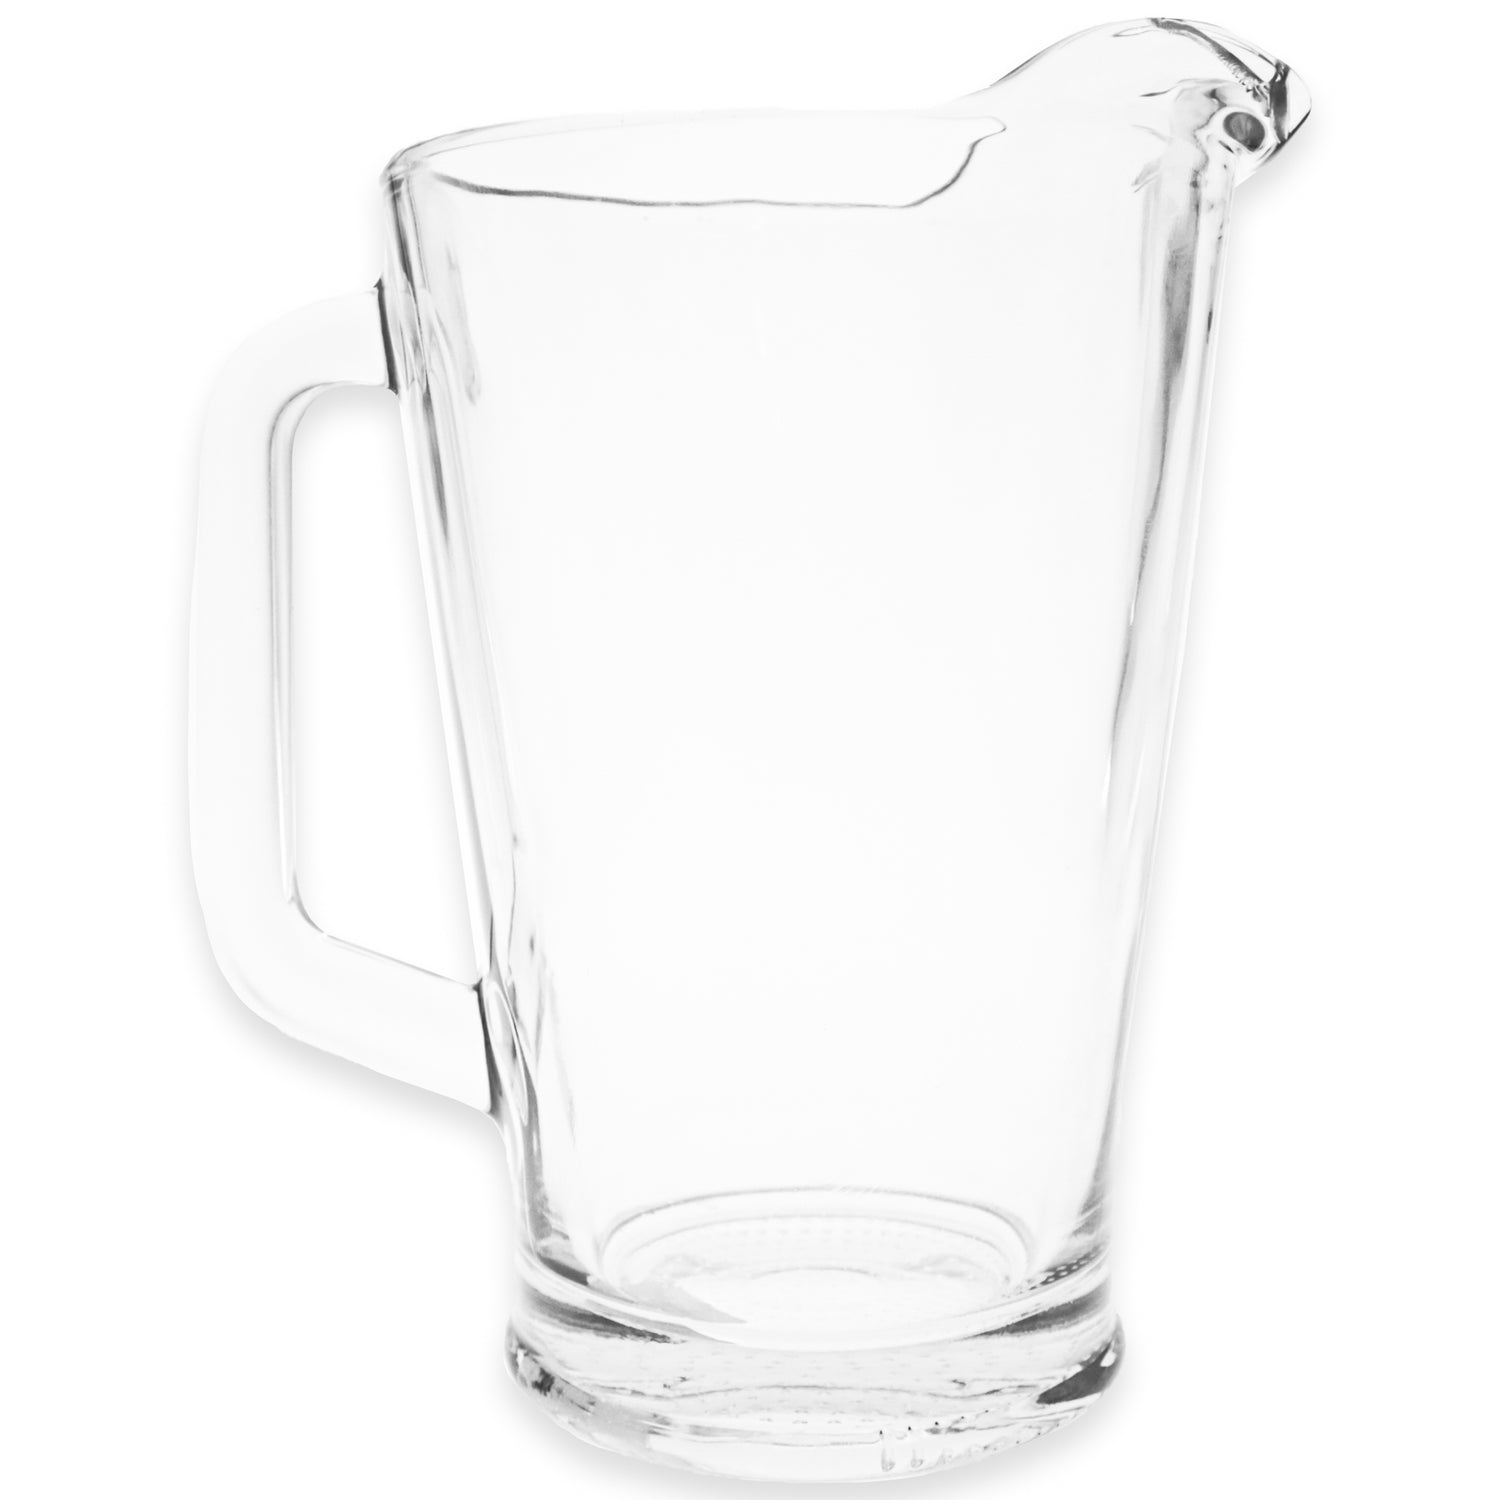 Set of 6 Clear Glass Beverage Pitcher 60 oz